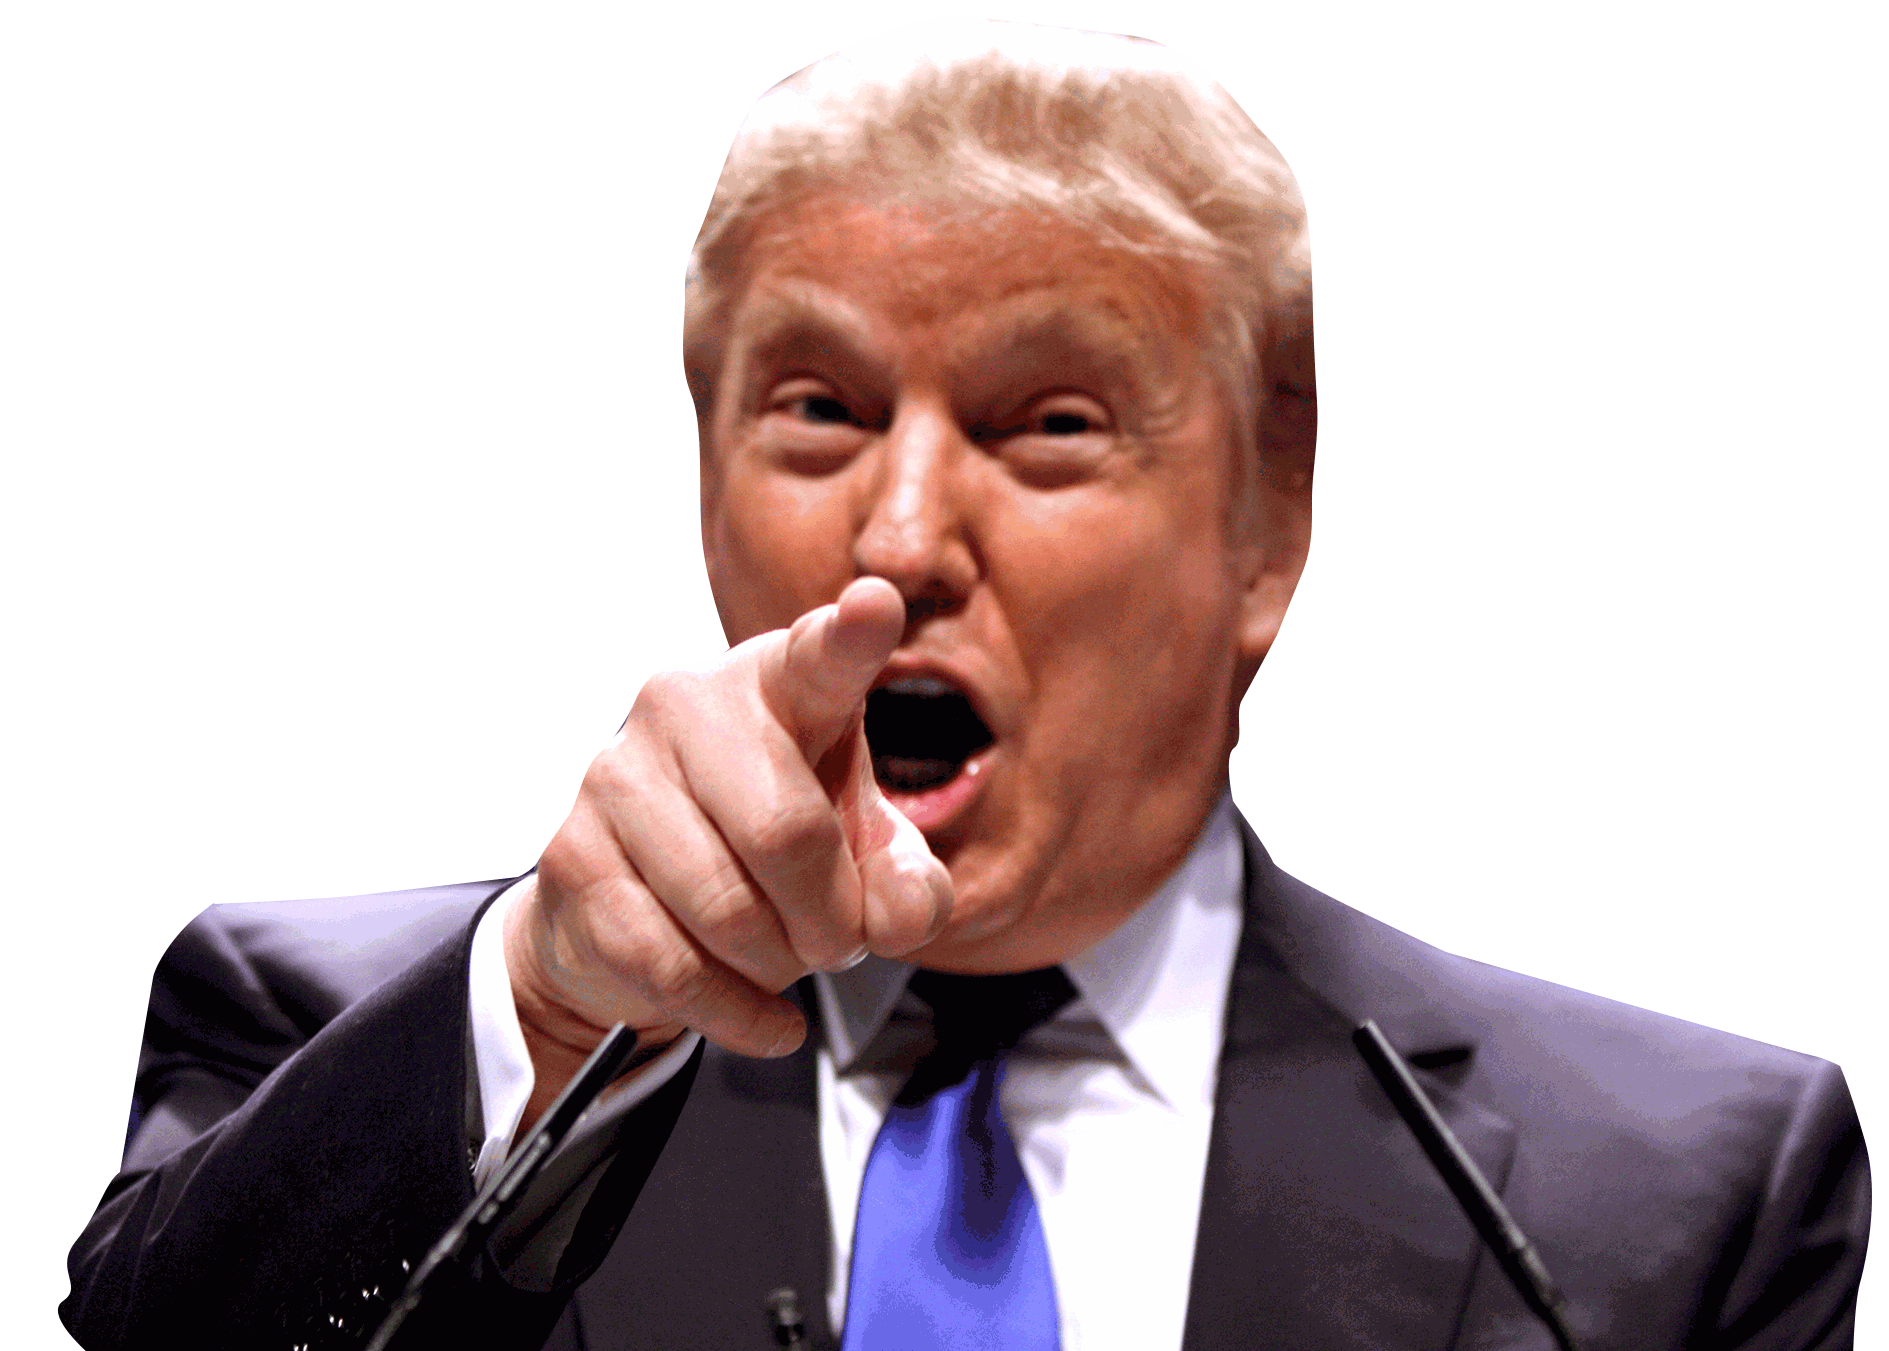 download donald trump picture png image pngimg #18786